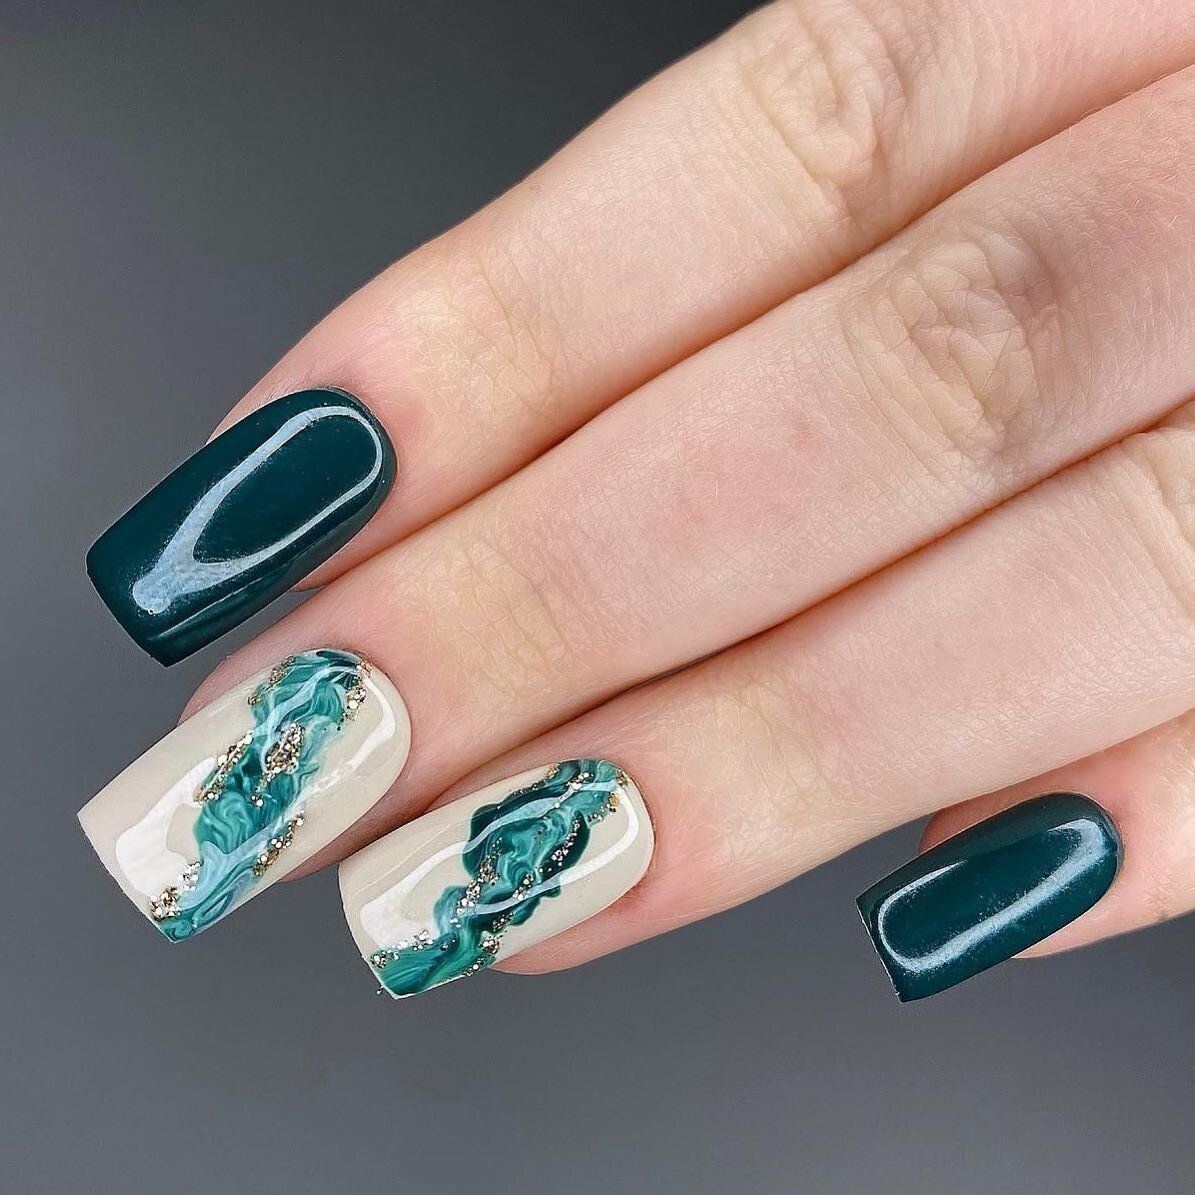 How gorg are these nails by @del_ti_x 😍😍😍 Head to Maris page @del_ti_x to book your appointments 💖 

#nails #nailsofinstagram #caernarfonsalon #northwalessalon #nailsalon #nailart #nailgoals